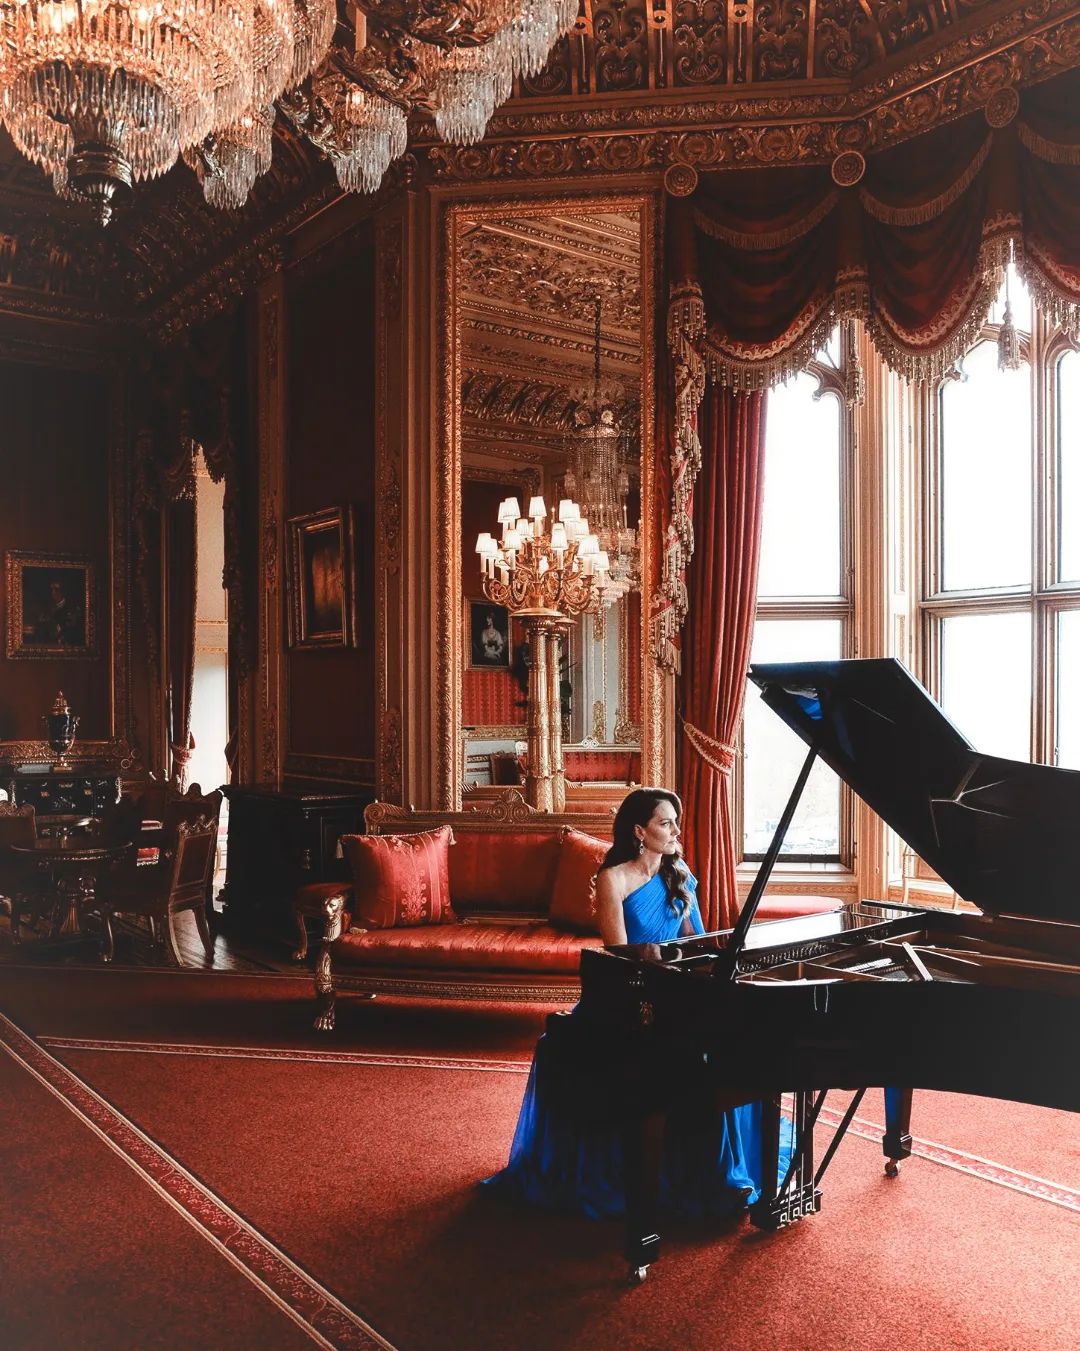 The performance was recorded at Windsor Castle earlier this month @KensingtonRoyal
